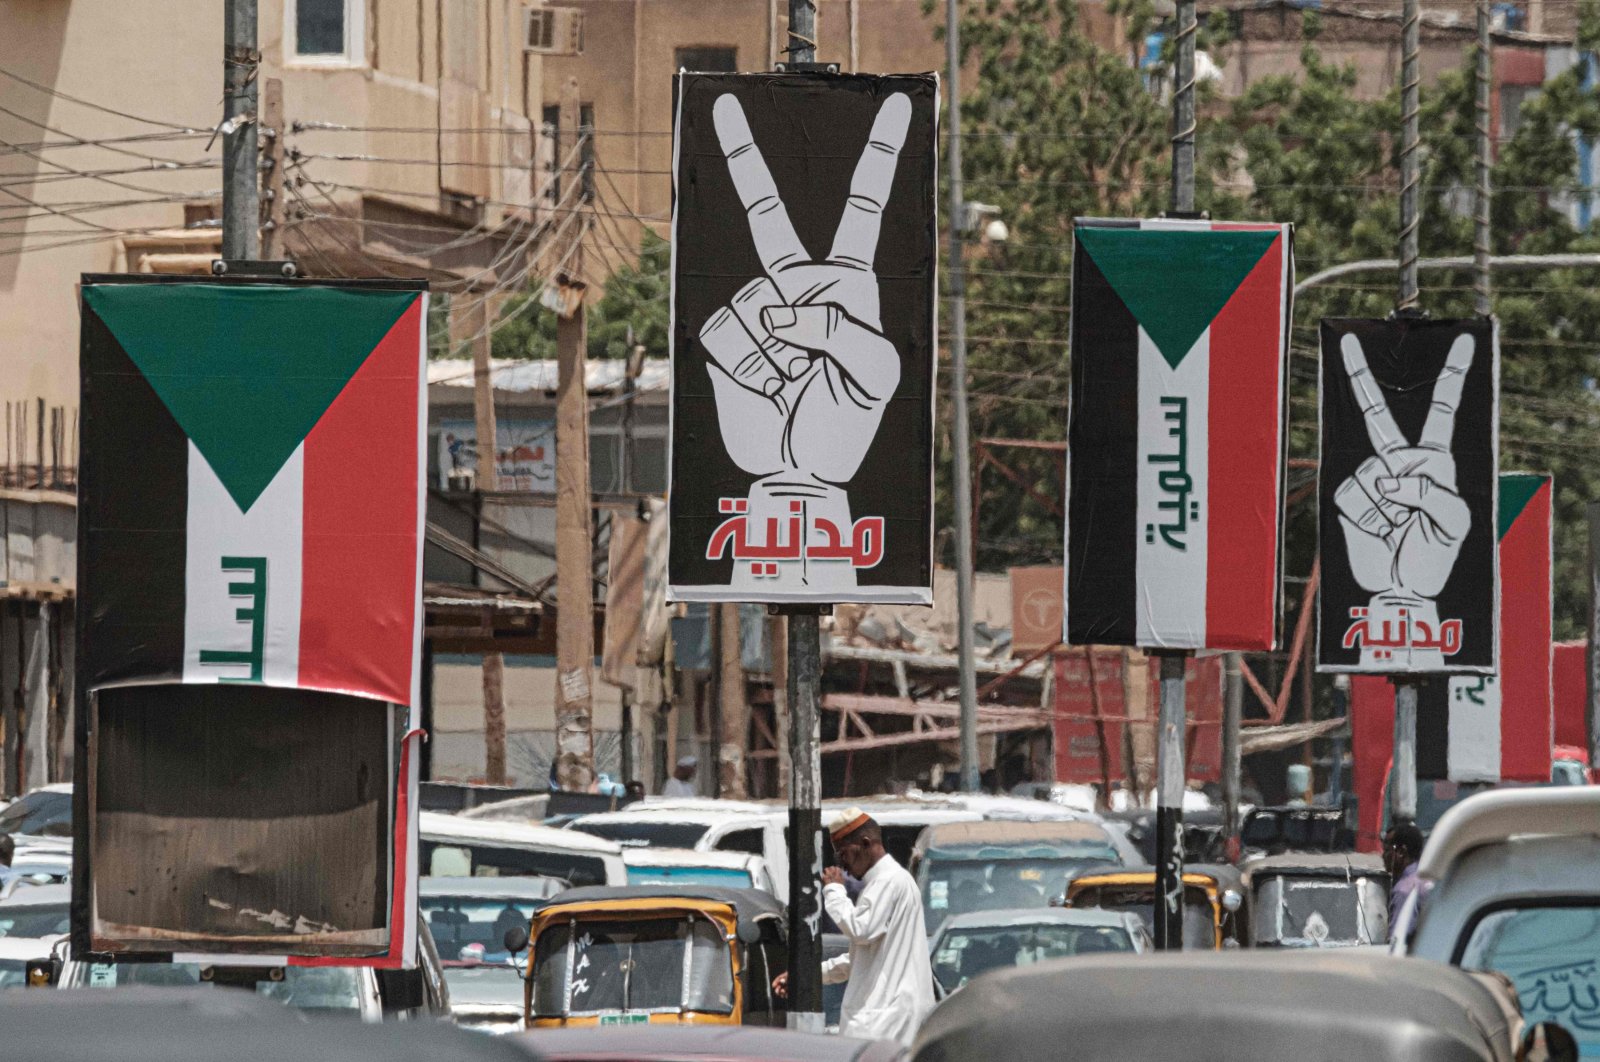 Placards showing the victory gesture with the Arabic word for civilian and others of the Sudanese flag with the word peaceful seen along a street in Khartoum, Sudan, June 15, 2019. (AFP Photo)